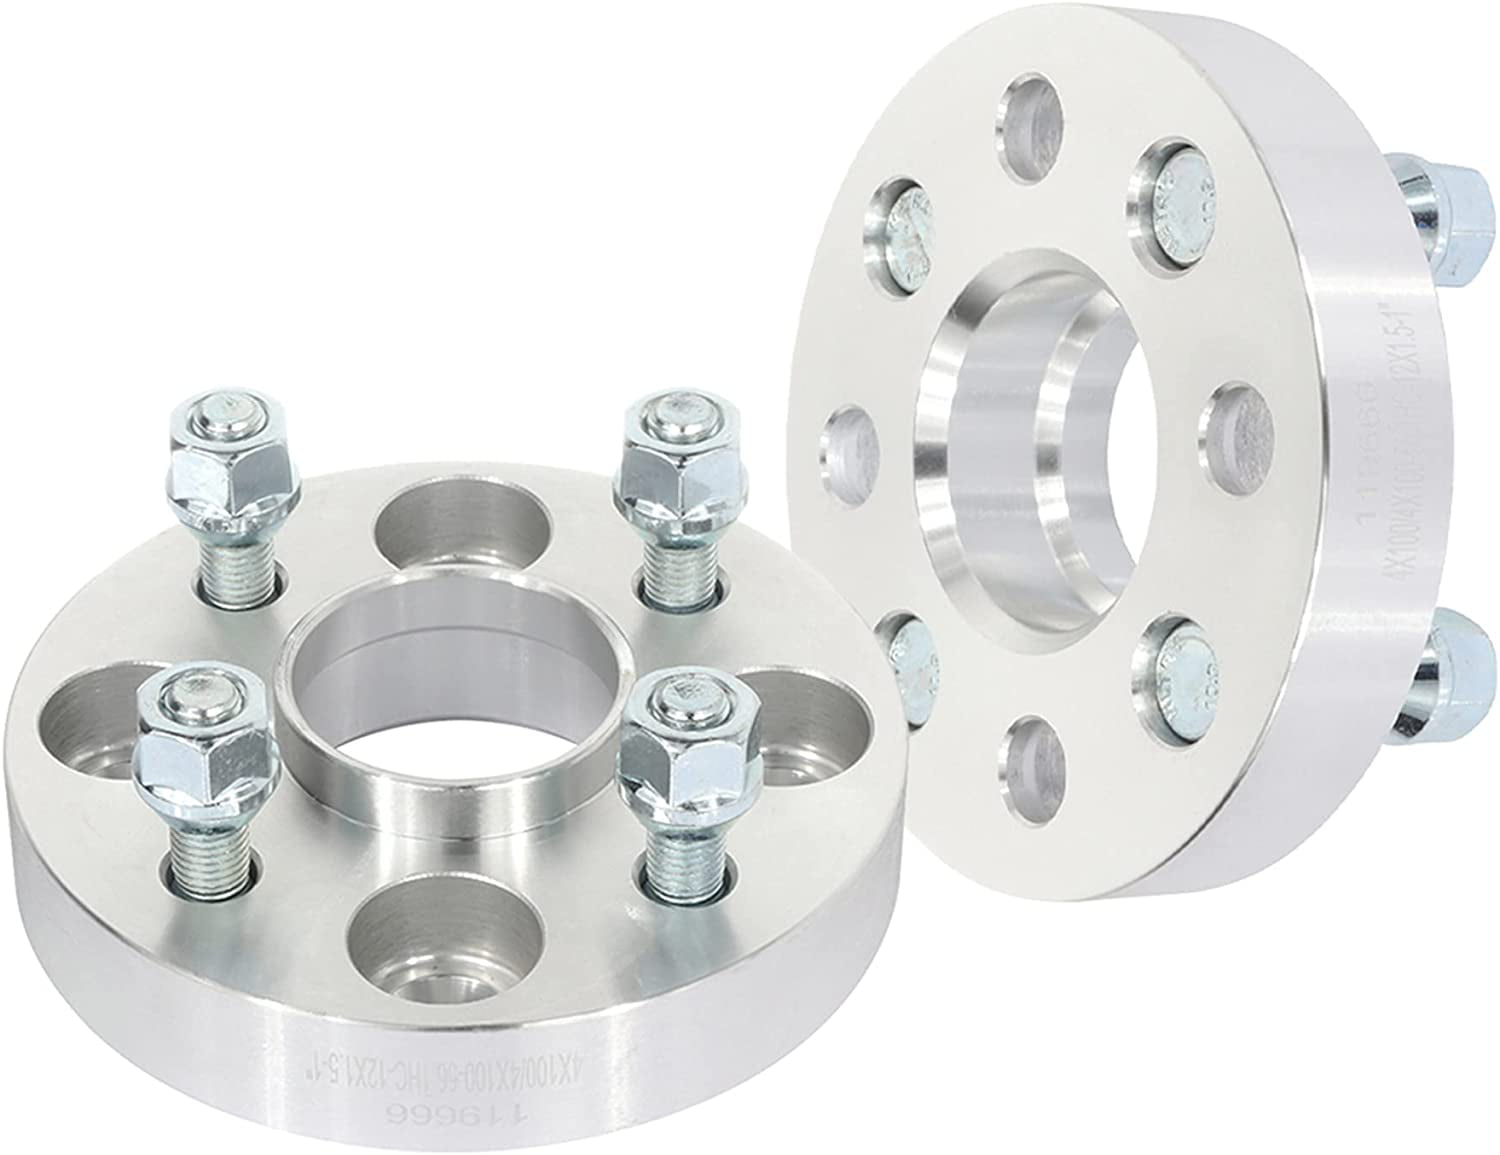 ECCPP 2X 1 inch Wheel Spacers Adapters 4 Lug 4x100 to 4x108 12x1.5 Studs 67.1mm fits for Ch-evr-olet Chevette for Ch-evr-olet Nova for Honda Civic 